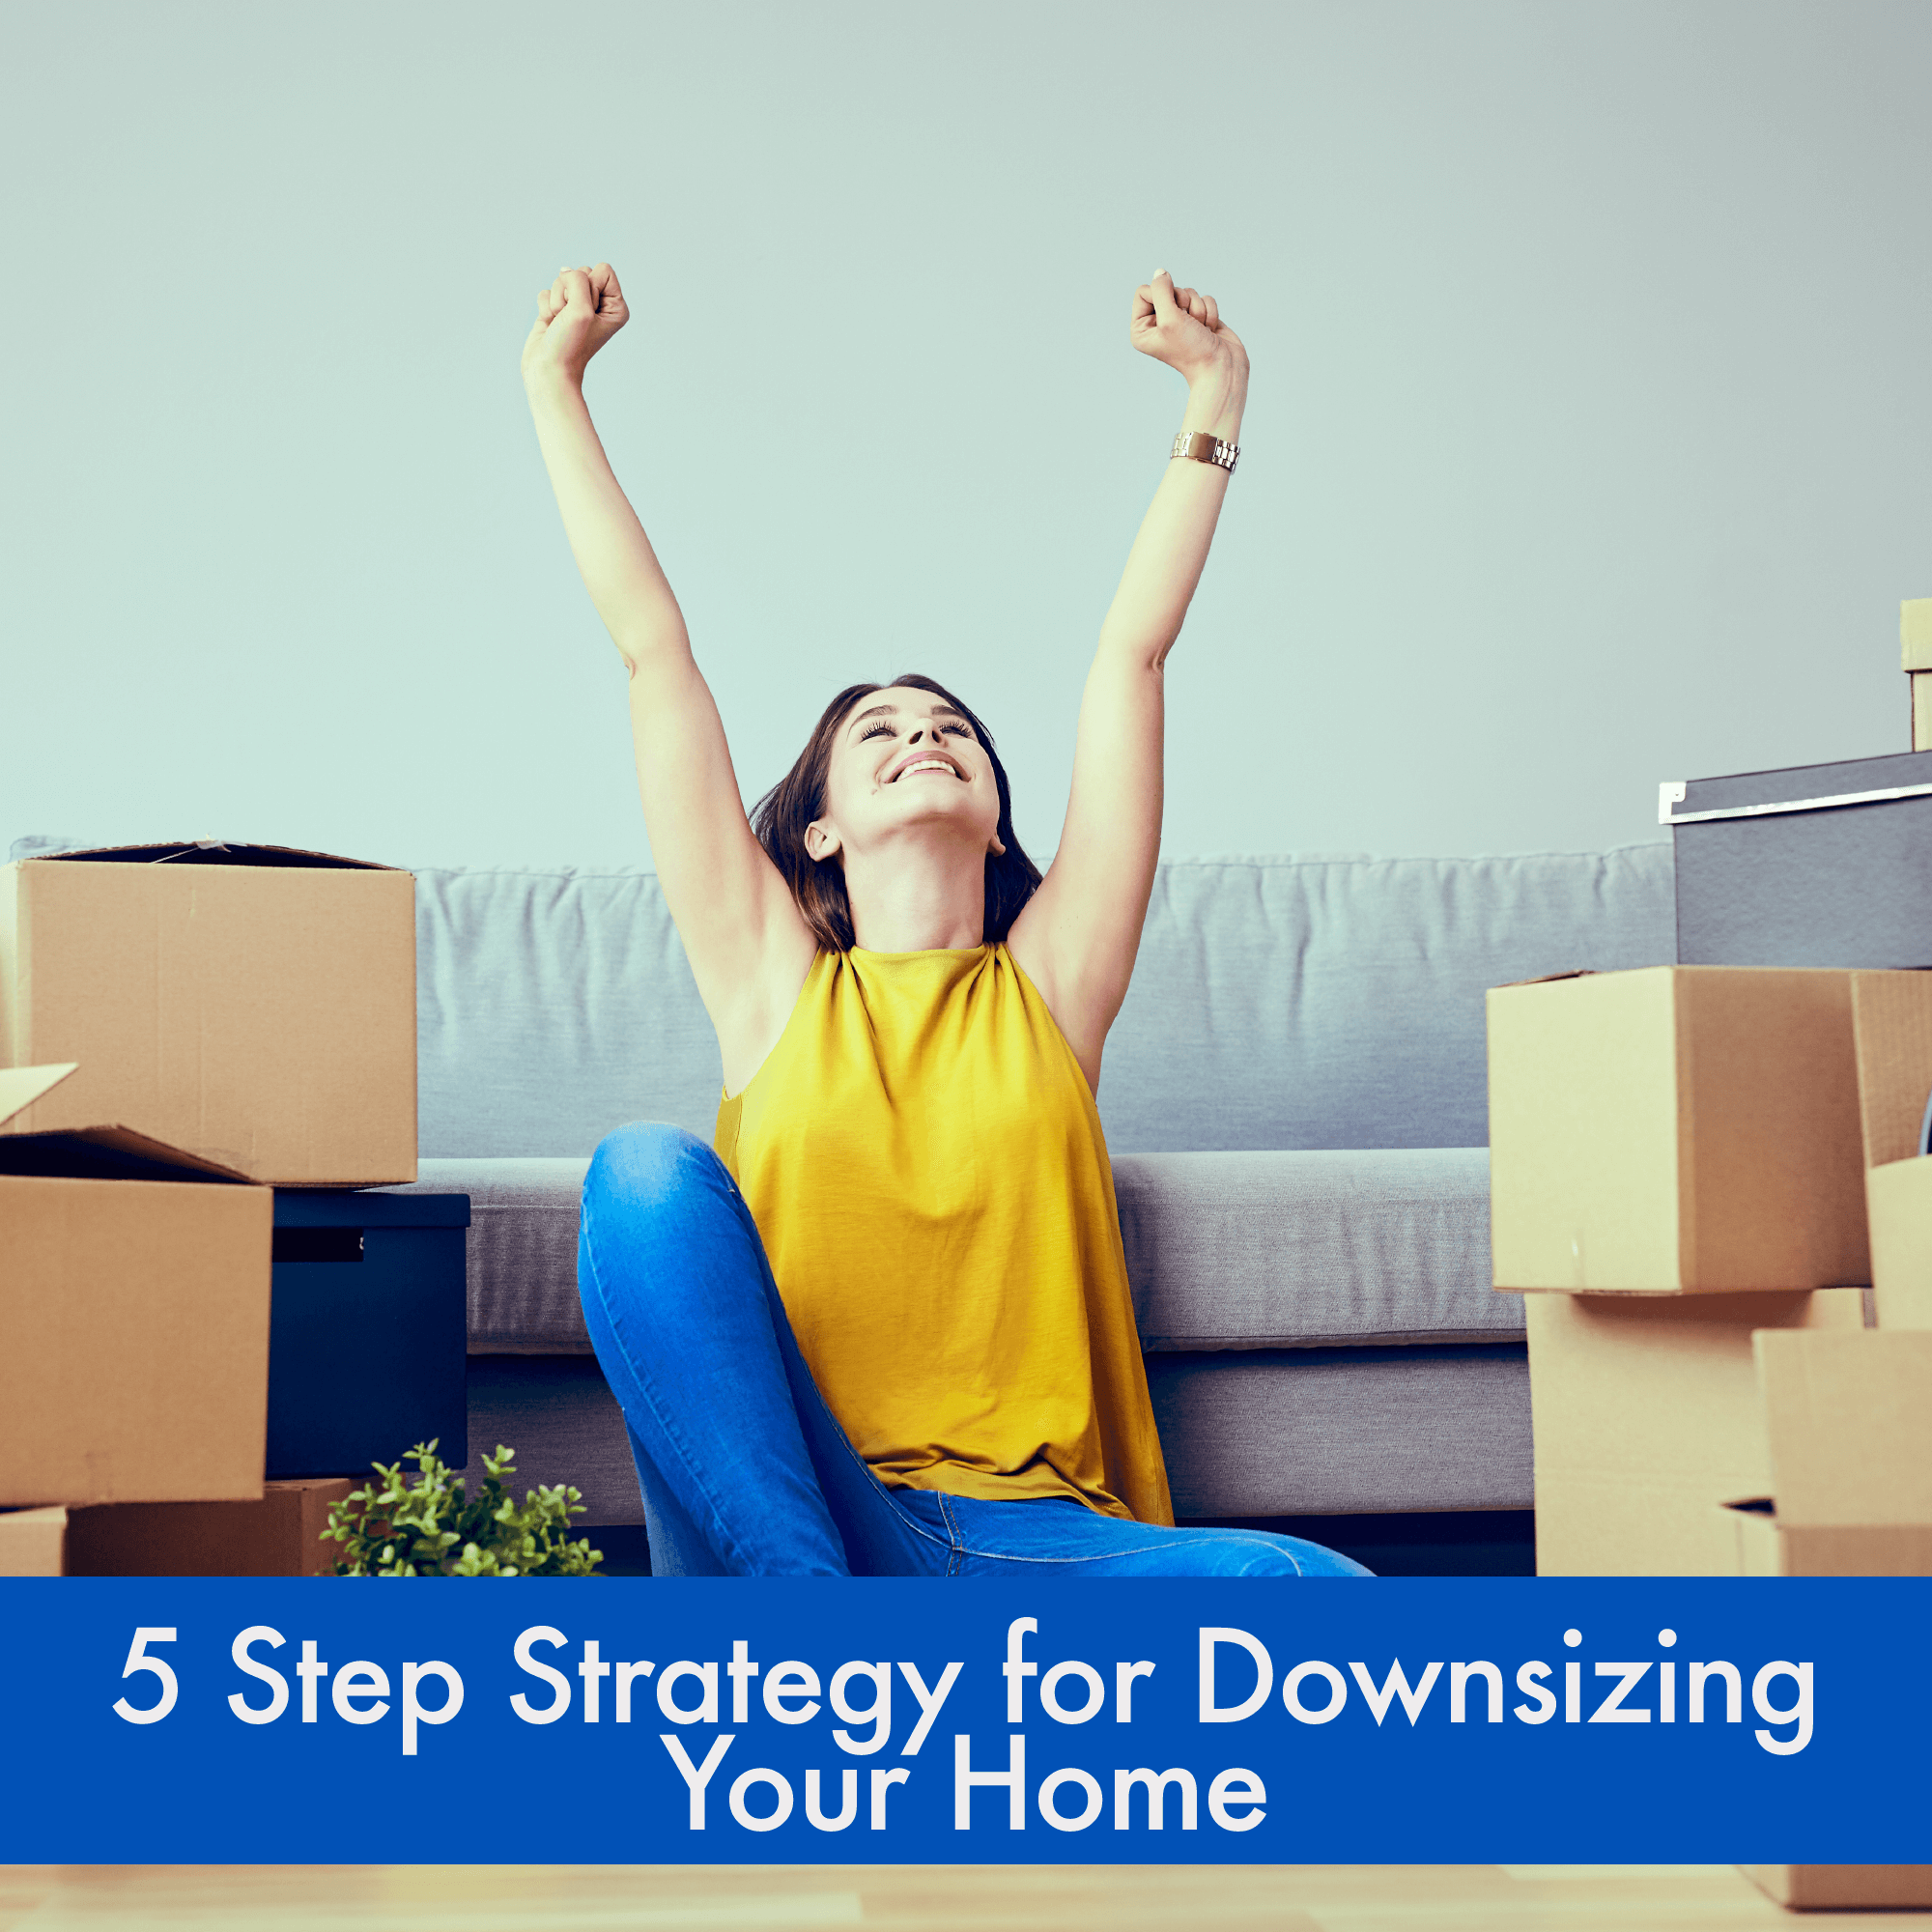 5 Step Strategy for Downsizing Your Home